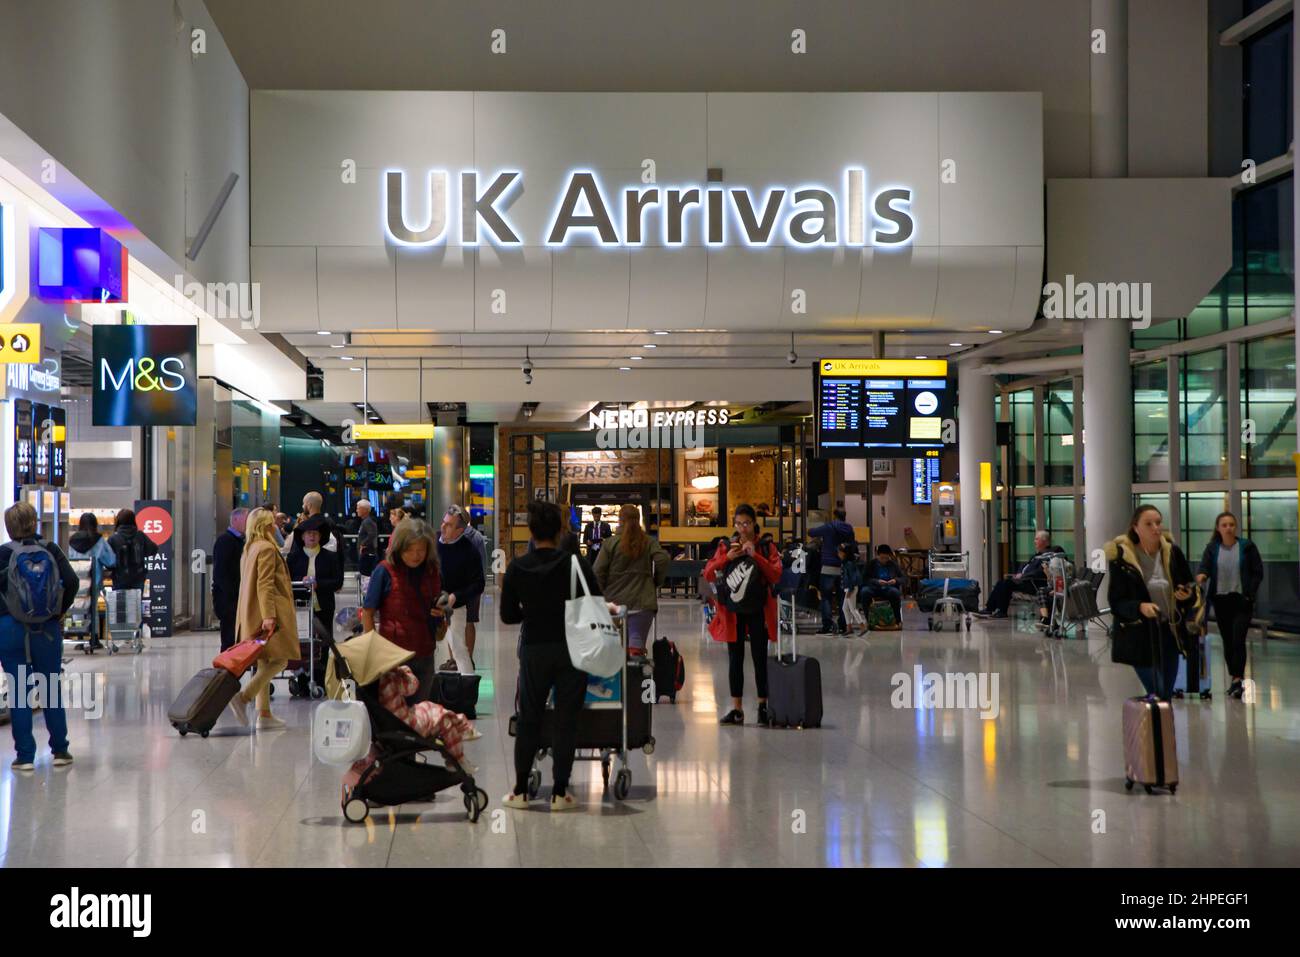 UK arrivals of Heathrow Airport in London, England Stock Photo